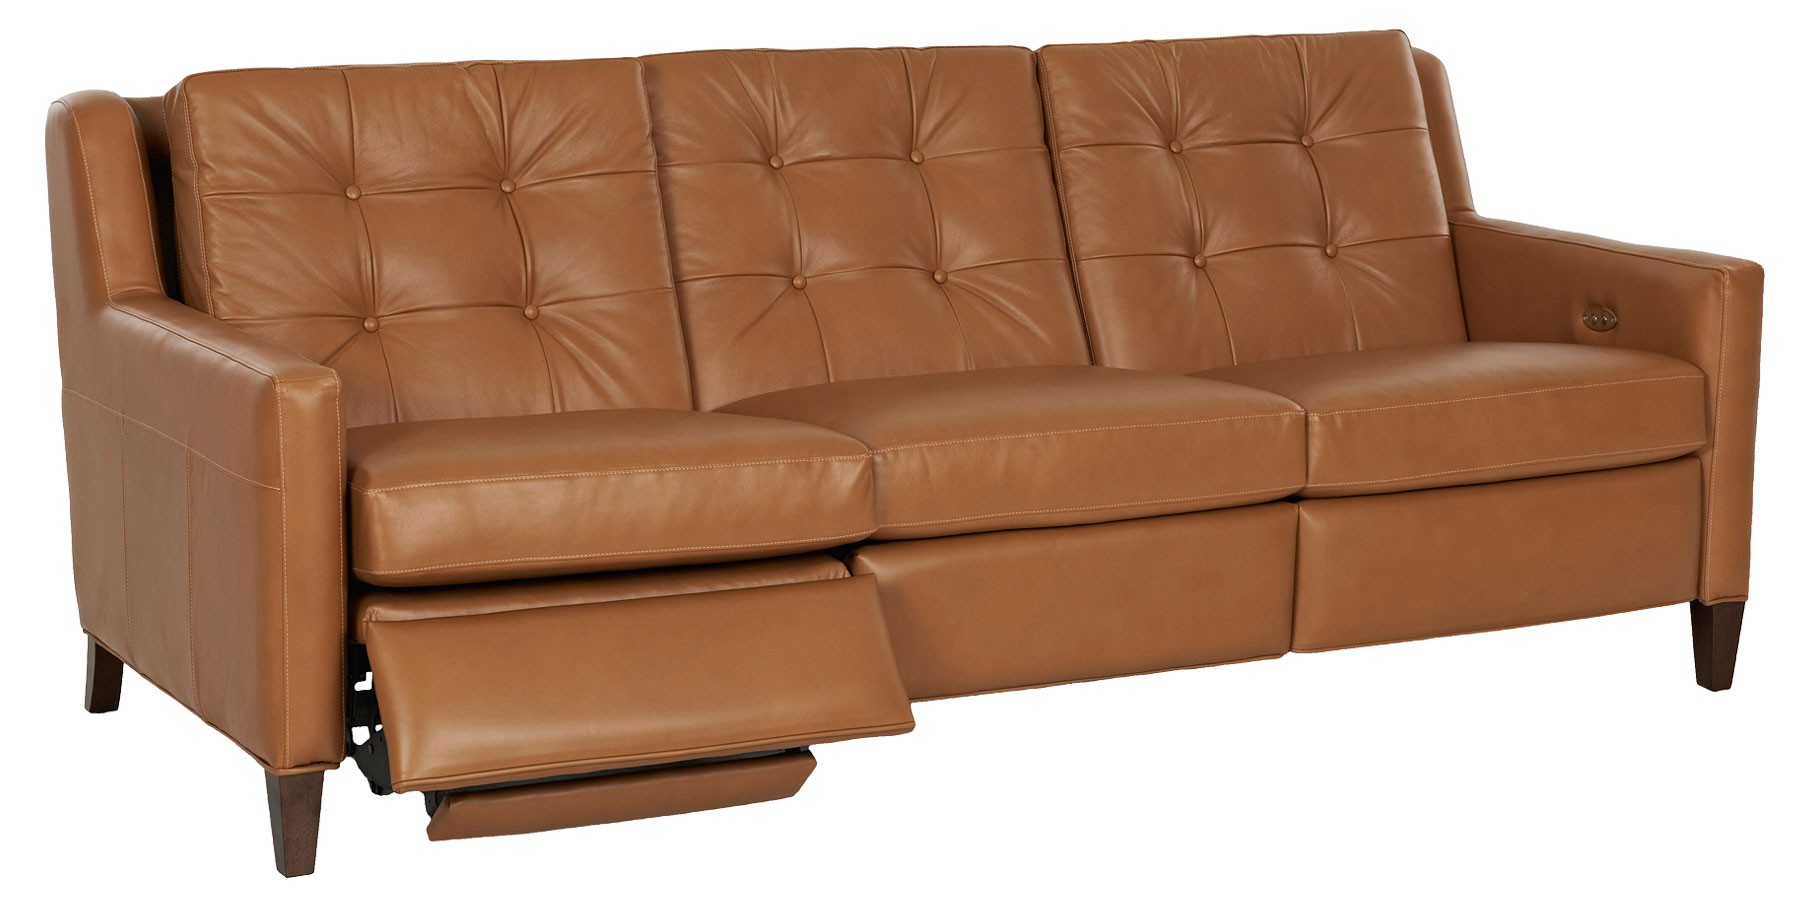 Lowry mid century modern wall hugger reclining collection